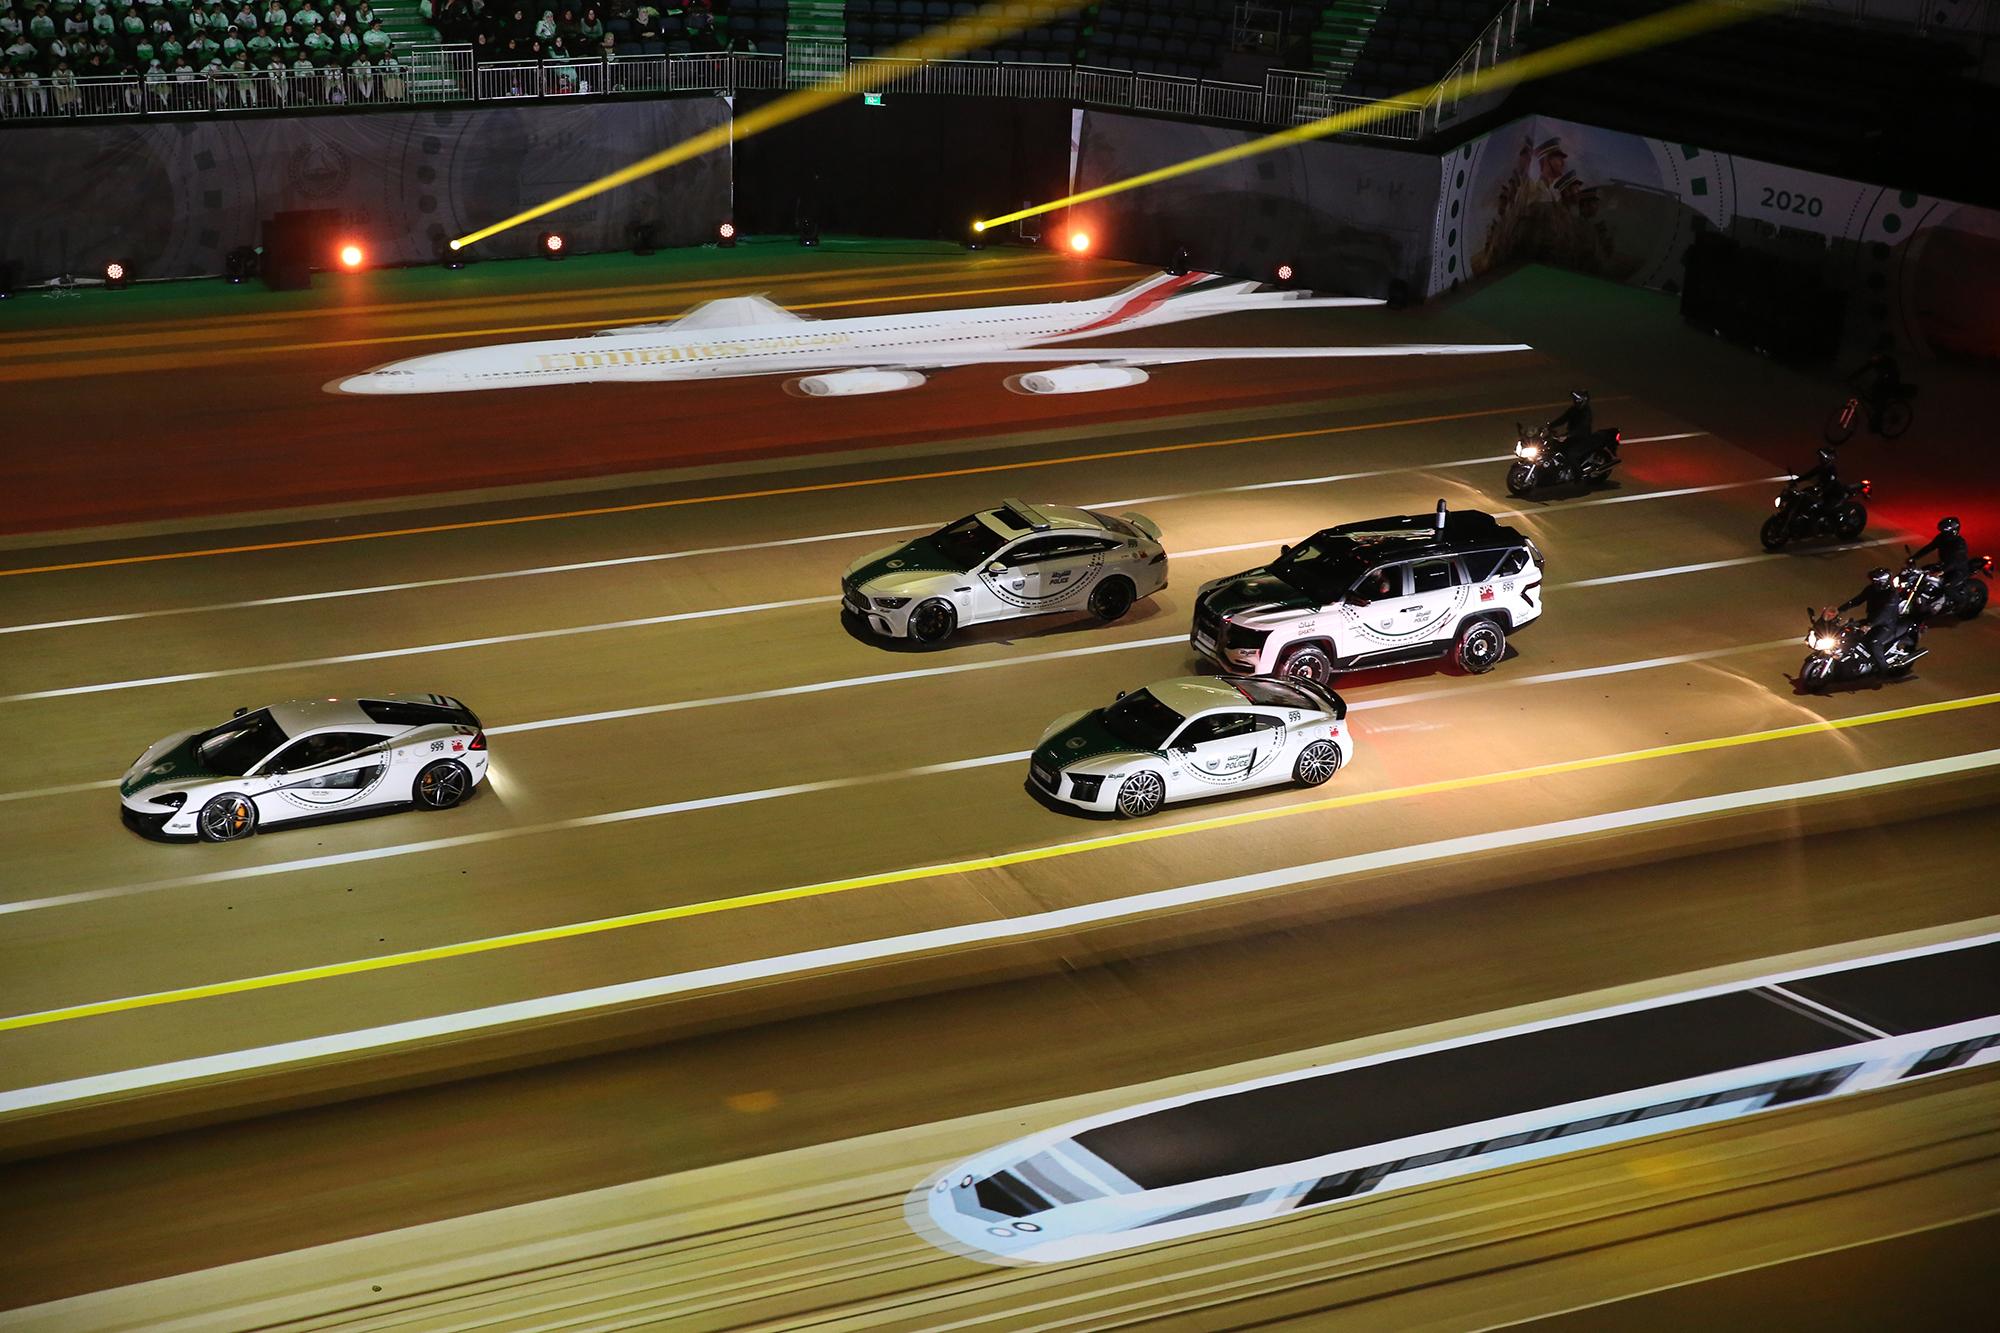 Physical cars and motorcycles drive in the arena on top of projection mapped content.